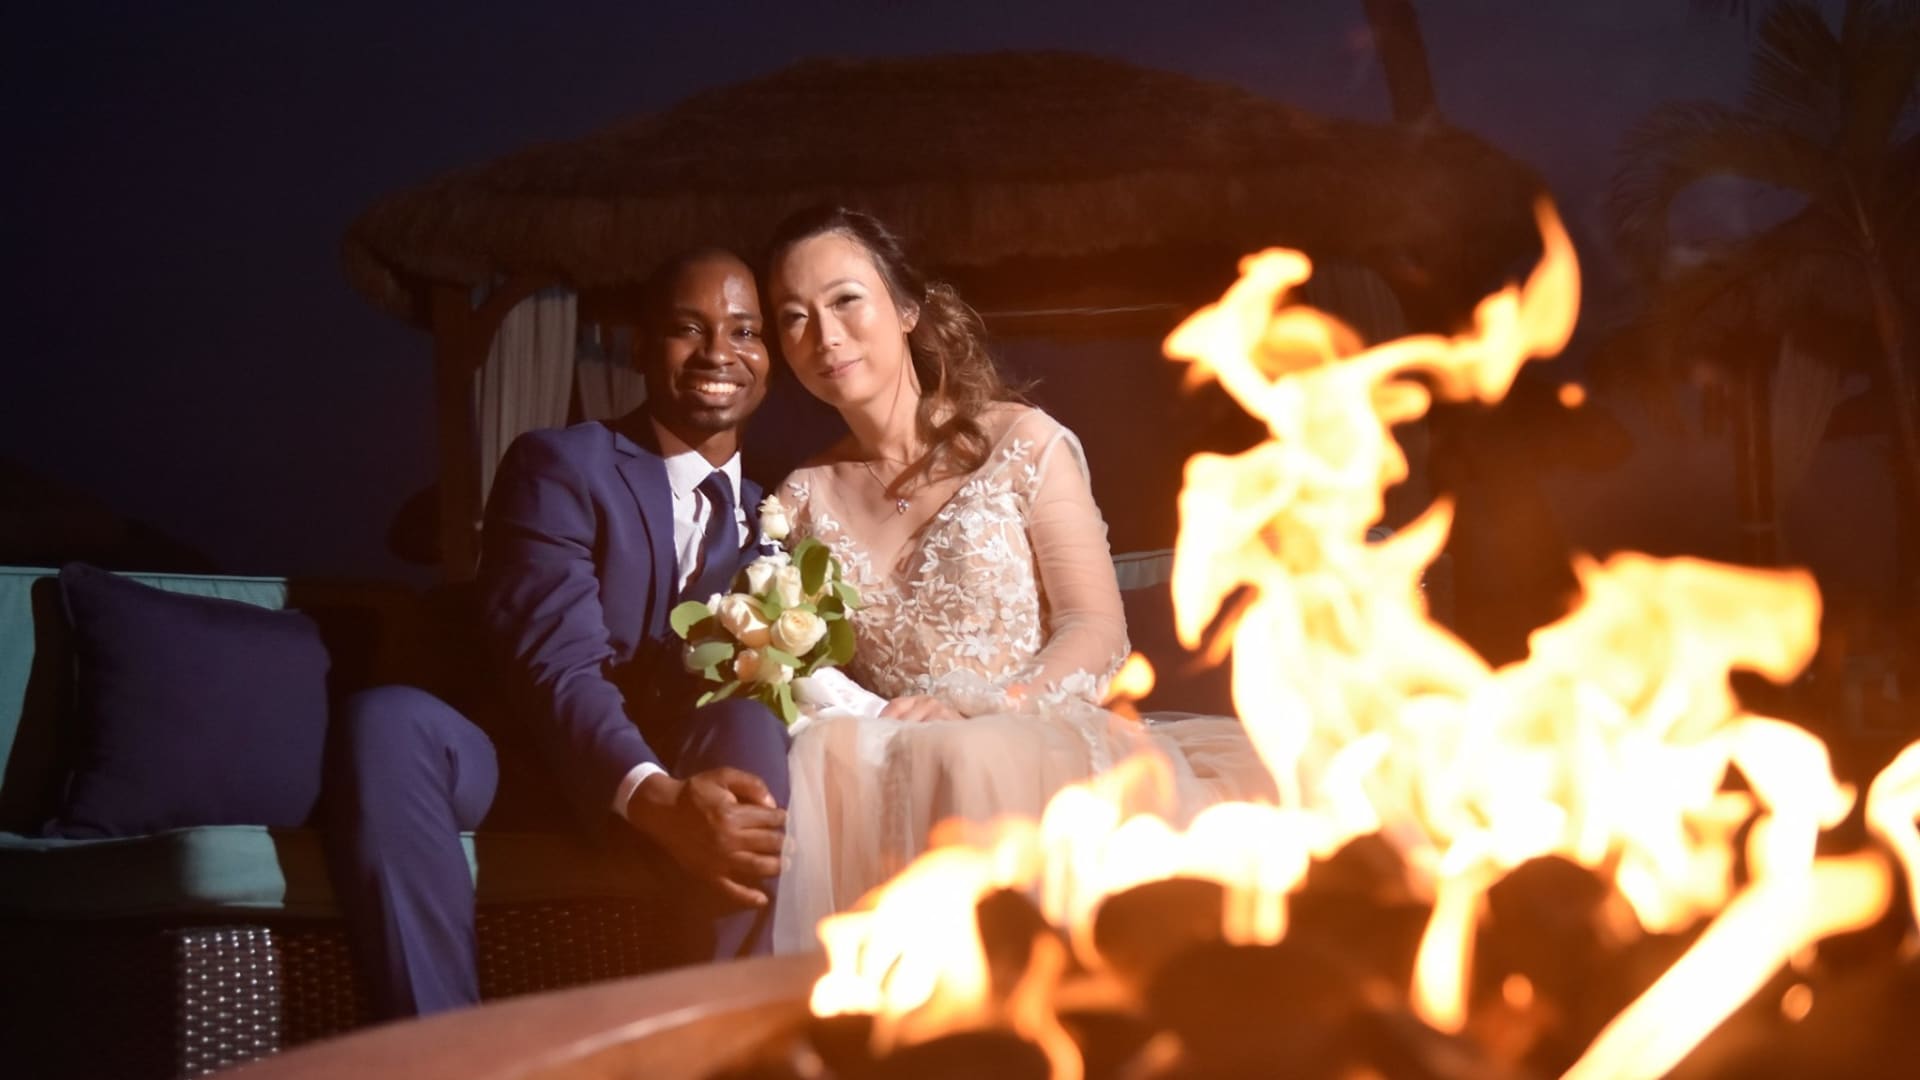 Richard Williamson, 34, says one of the reasons he delayed marriage was that he needed to build up his savings, a task made more difficult thanks to student loans. Although they met in 2014, Williamson and his wife Vanice finally tied the knot in 2019.